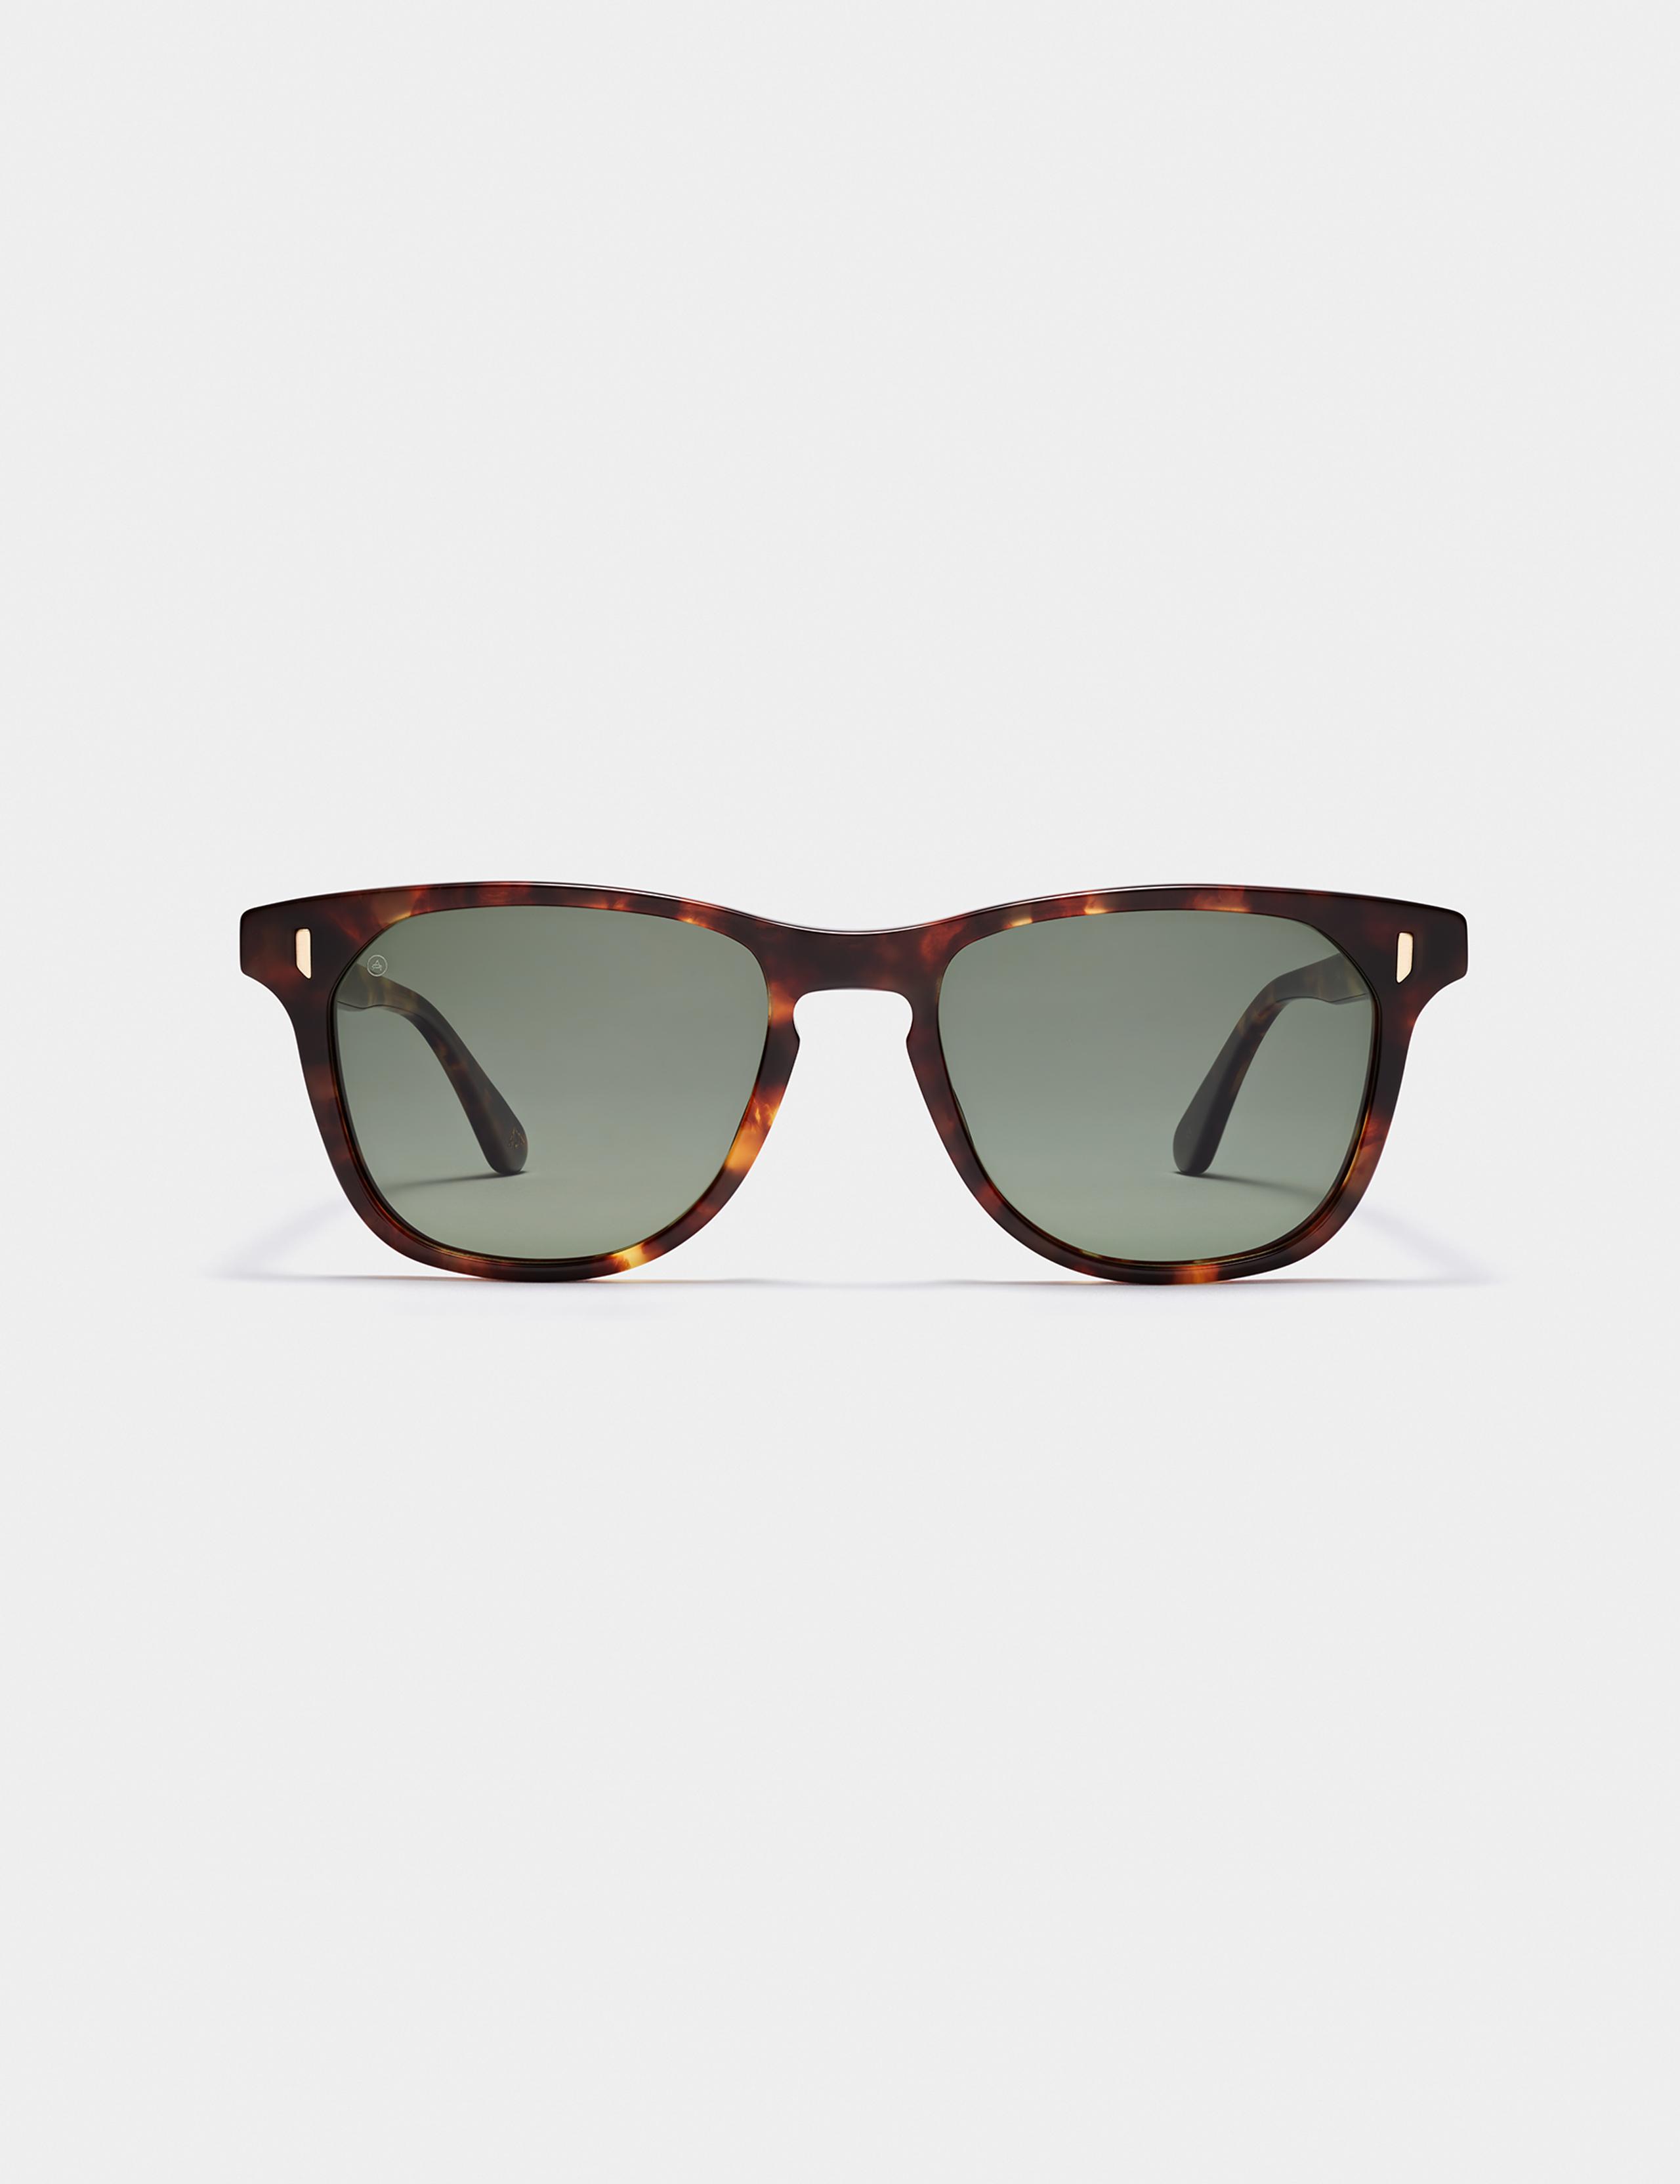 Studio front view of Yosemite in Tortoise with Deep G15 polarized lens